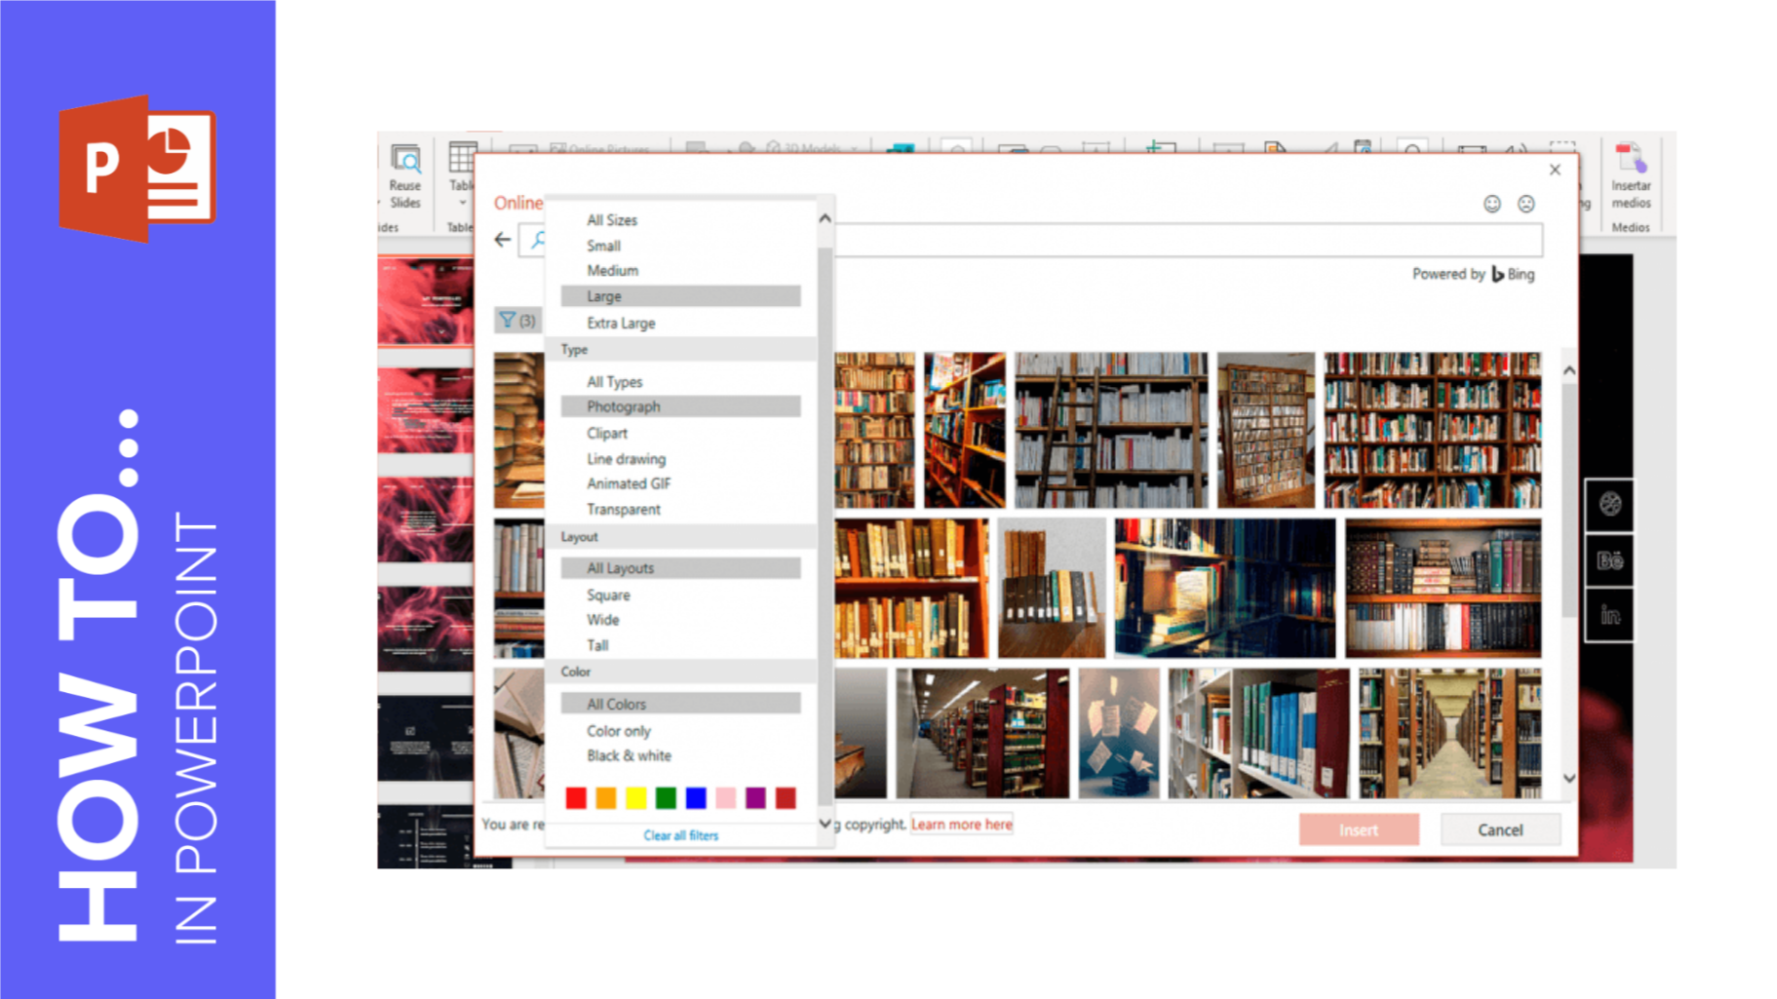 How to Insert, Crop or Mask Images in PowerPoint